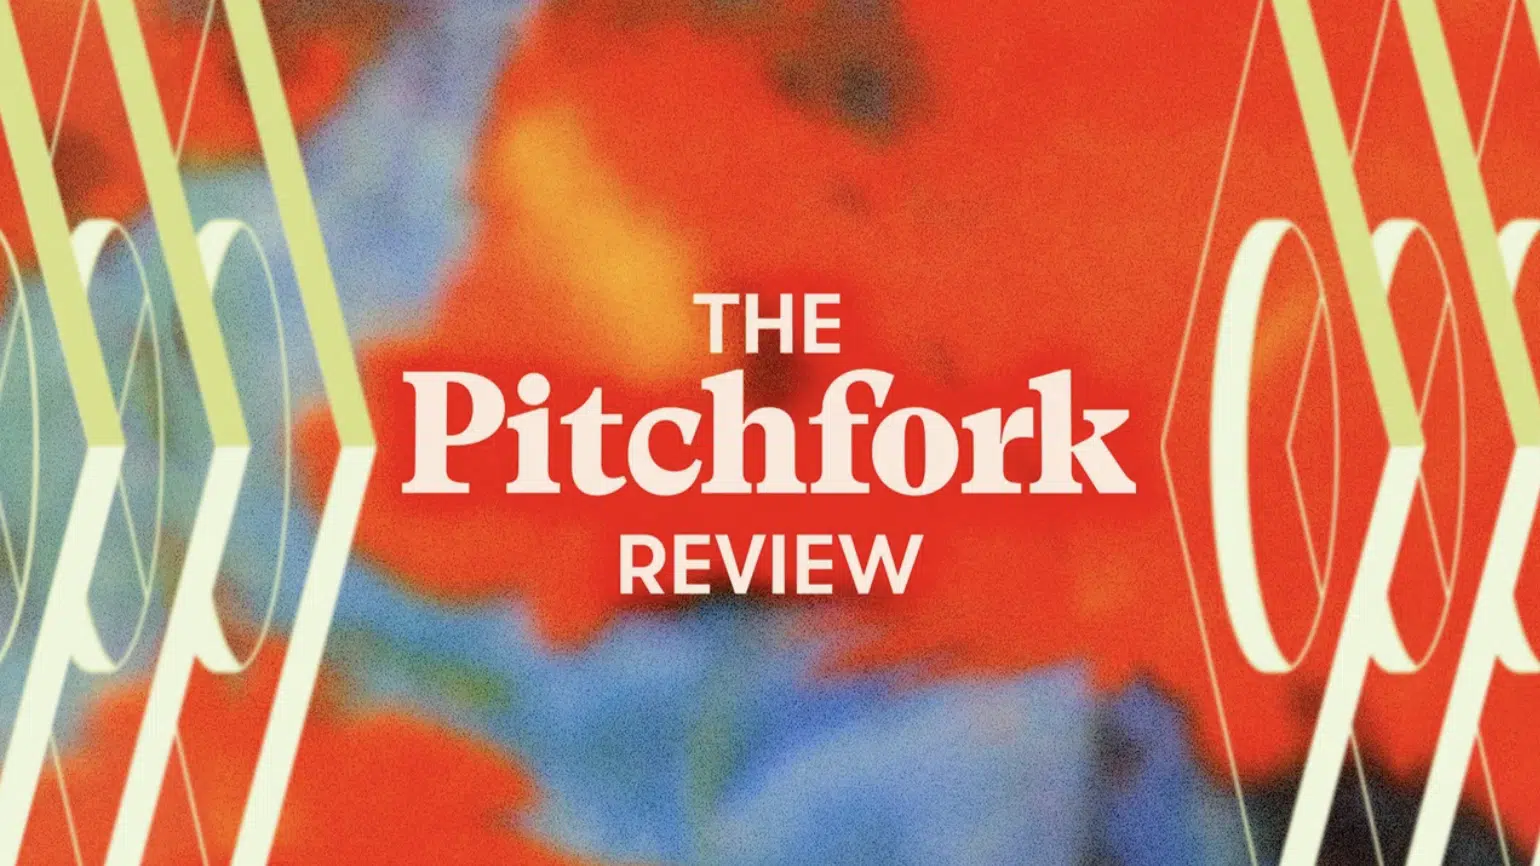 The Pitchfork Review - Unison